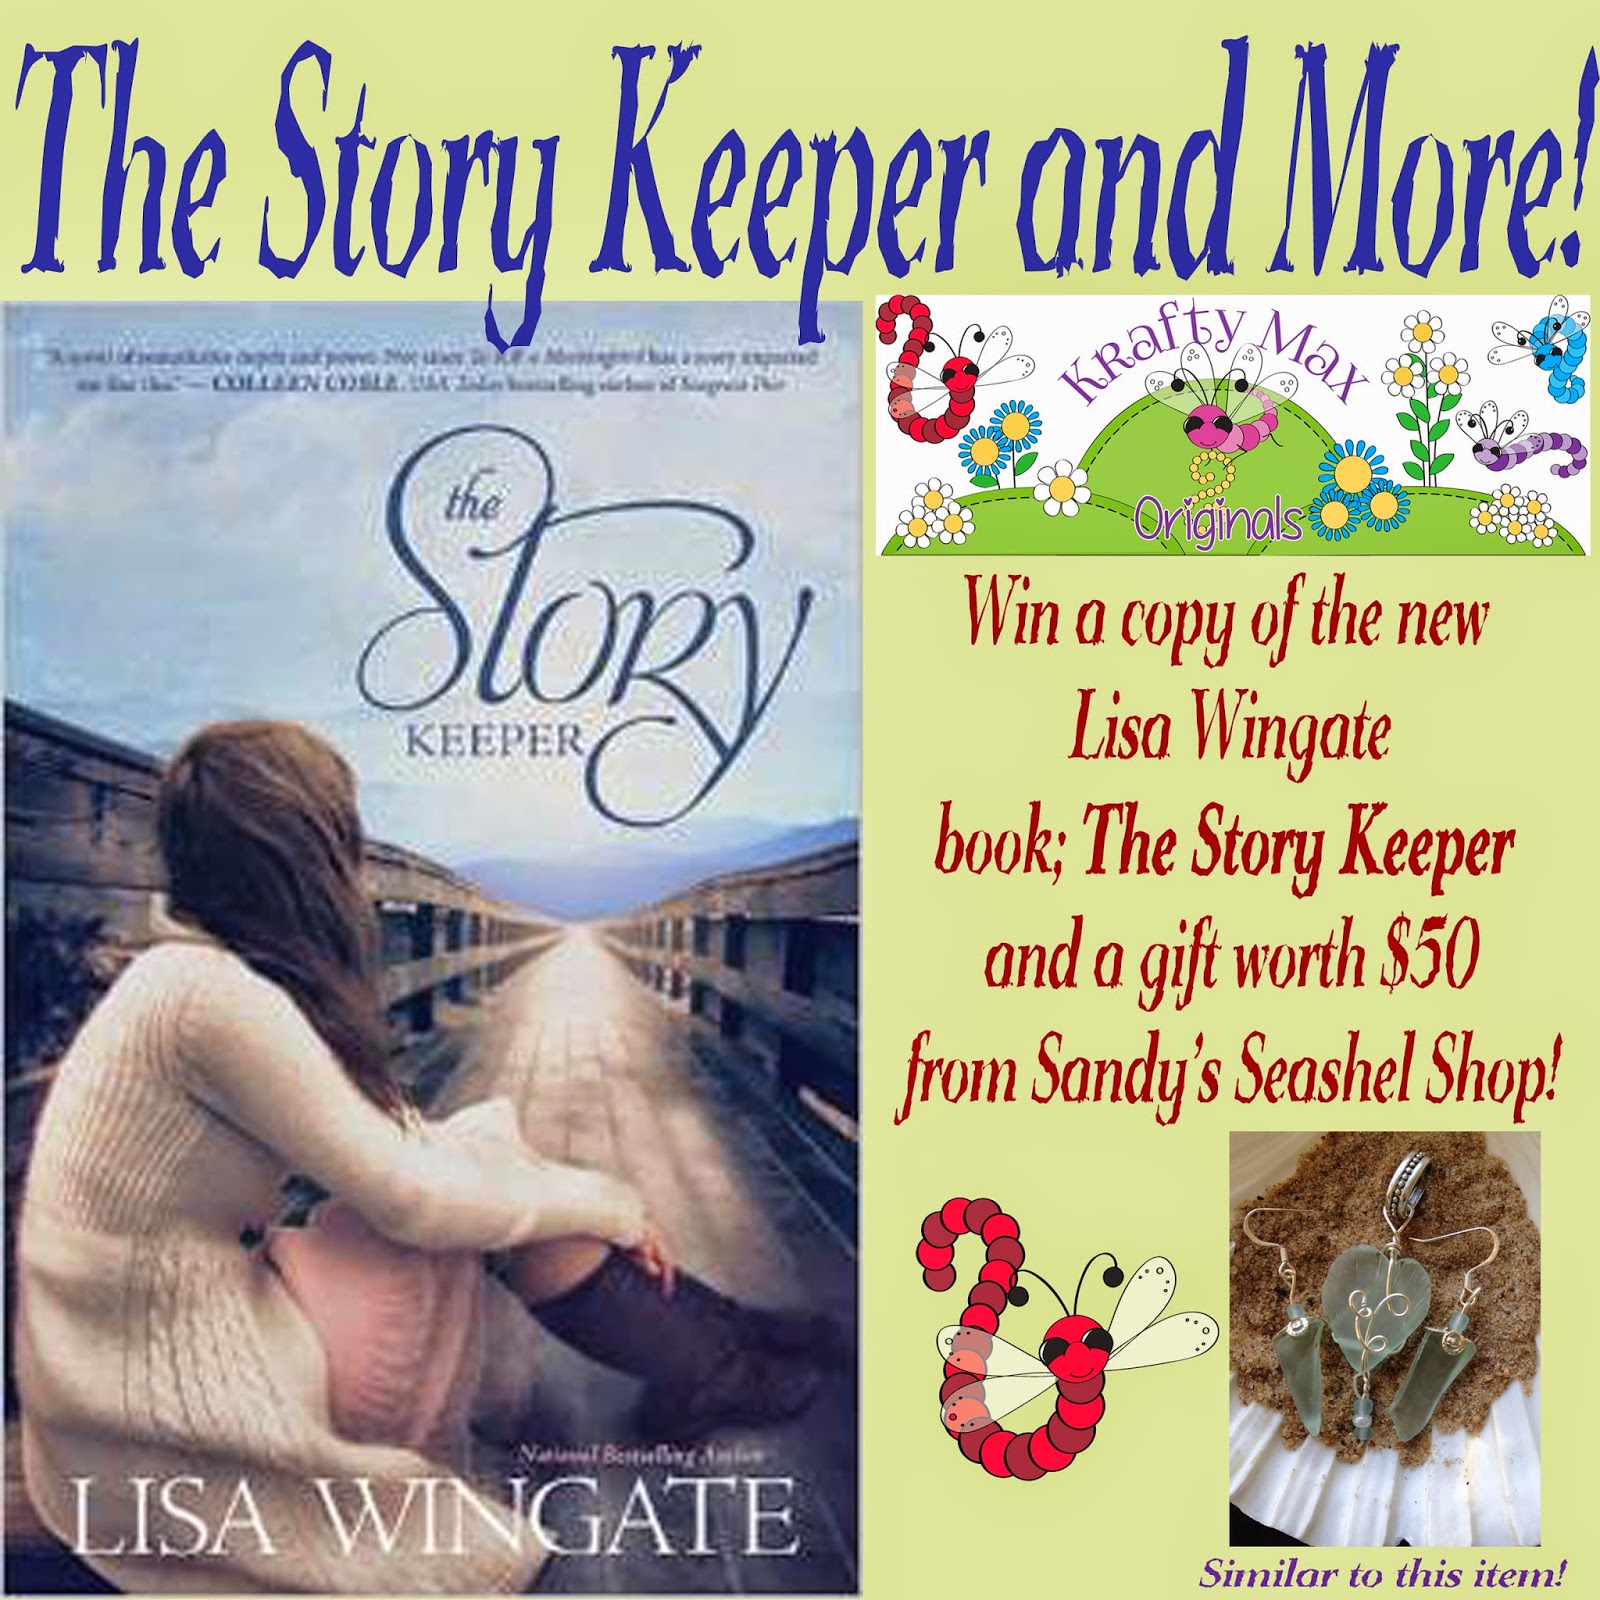 http://kraftymax.blogspot.com/2014/08/the-story-keeper-and-more.html